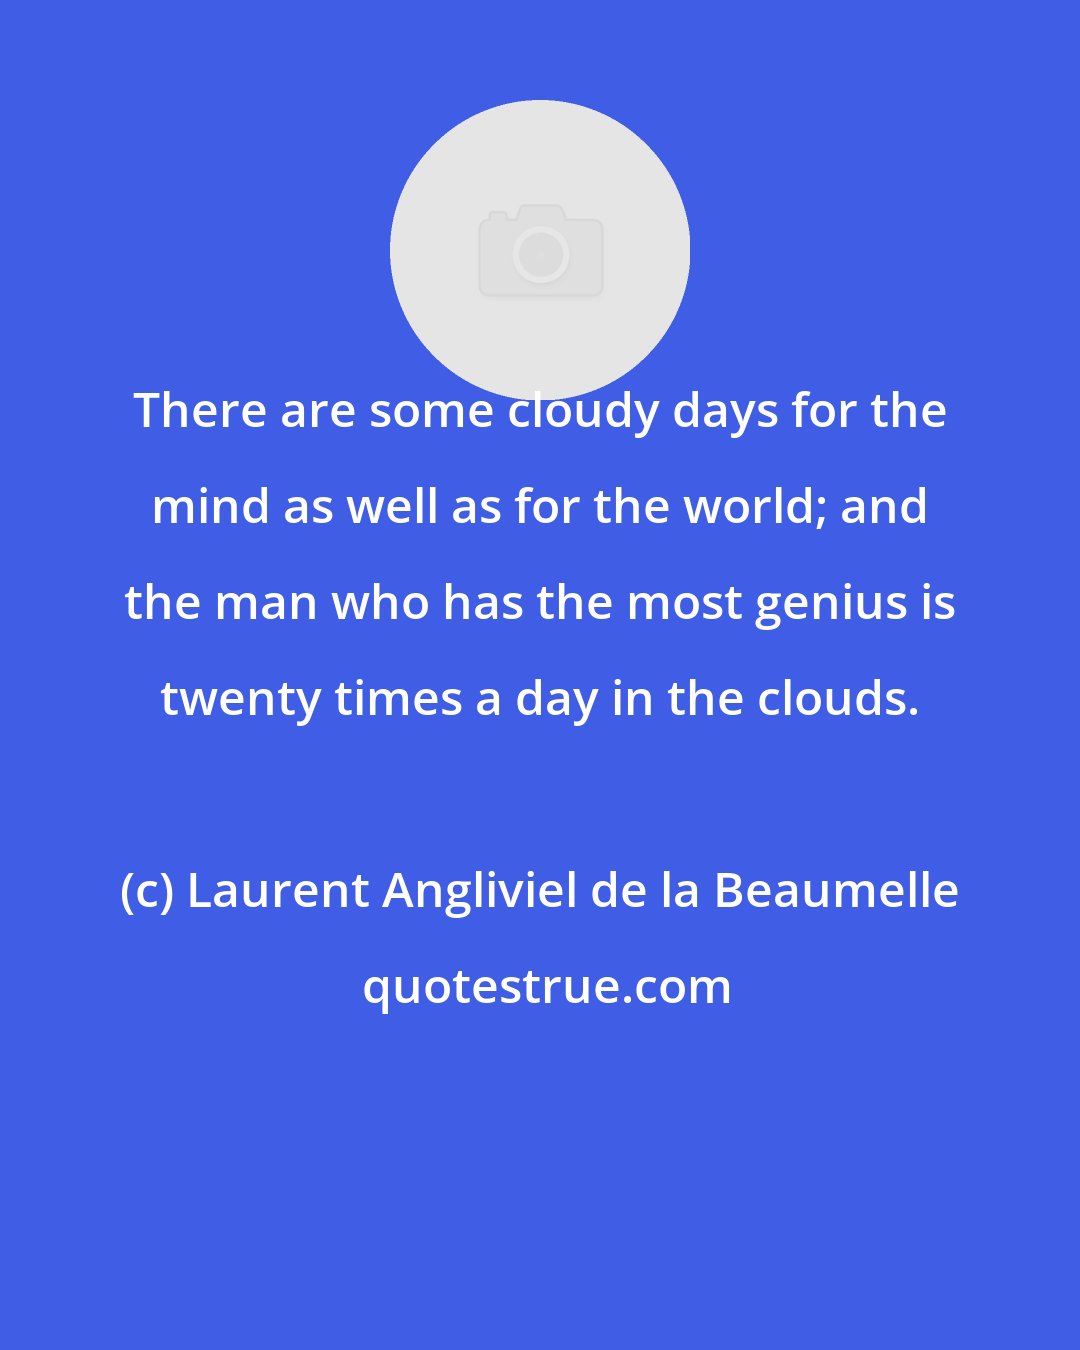 Laurent Angliviel de la Beaumelle: There are some cloudy days for the mind as well as for the world; and the man who has the most genius is twenty times a day in the clouds.